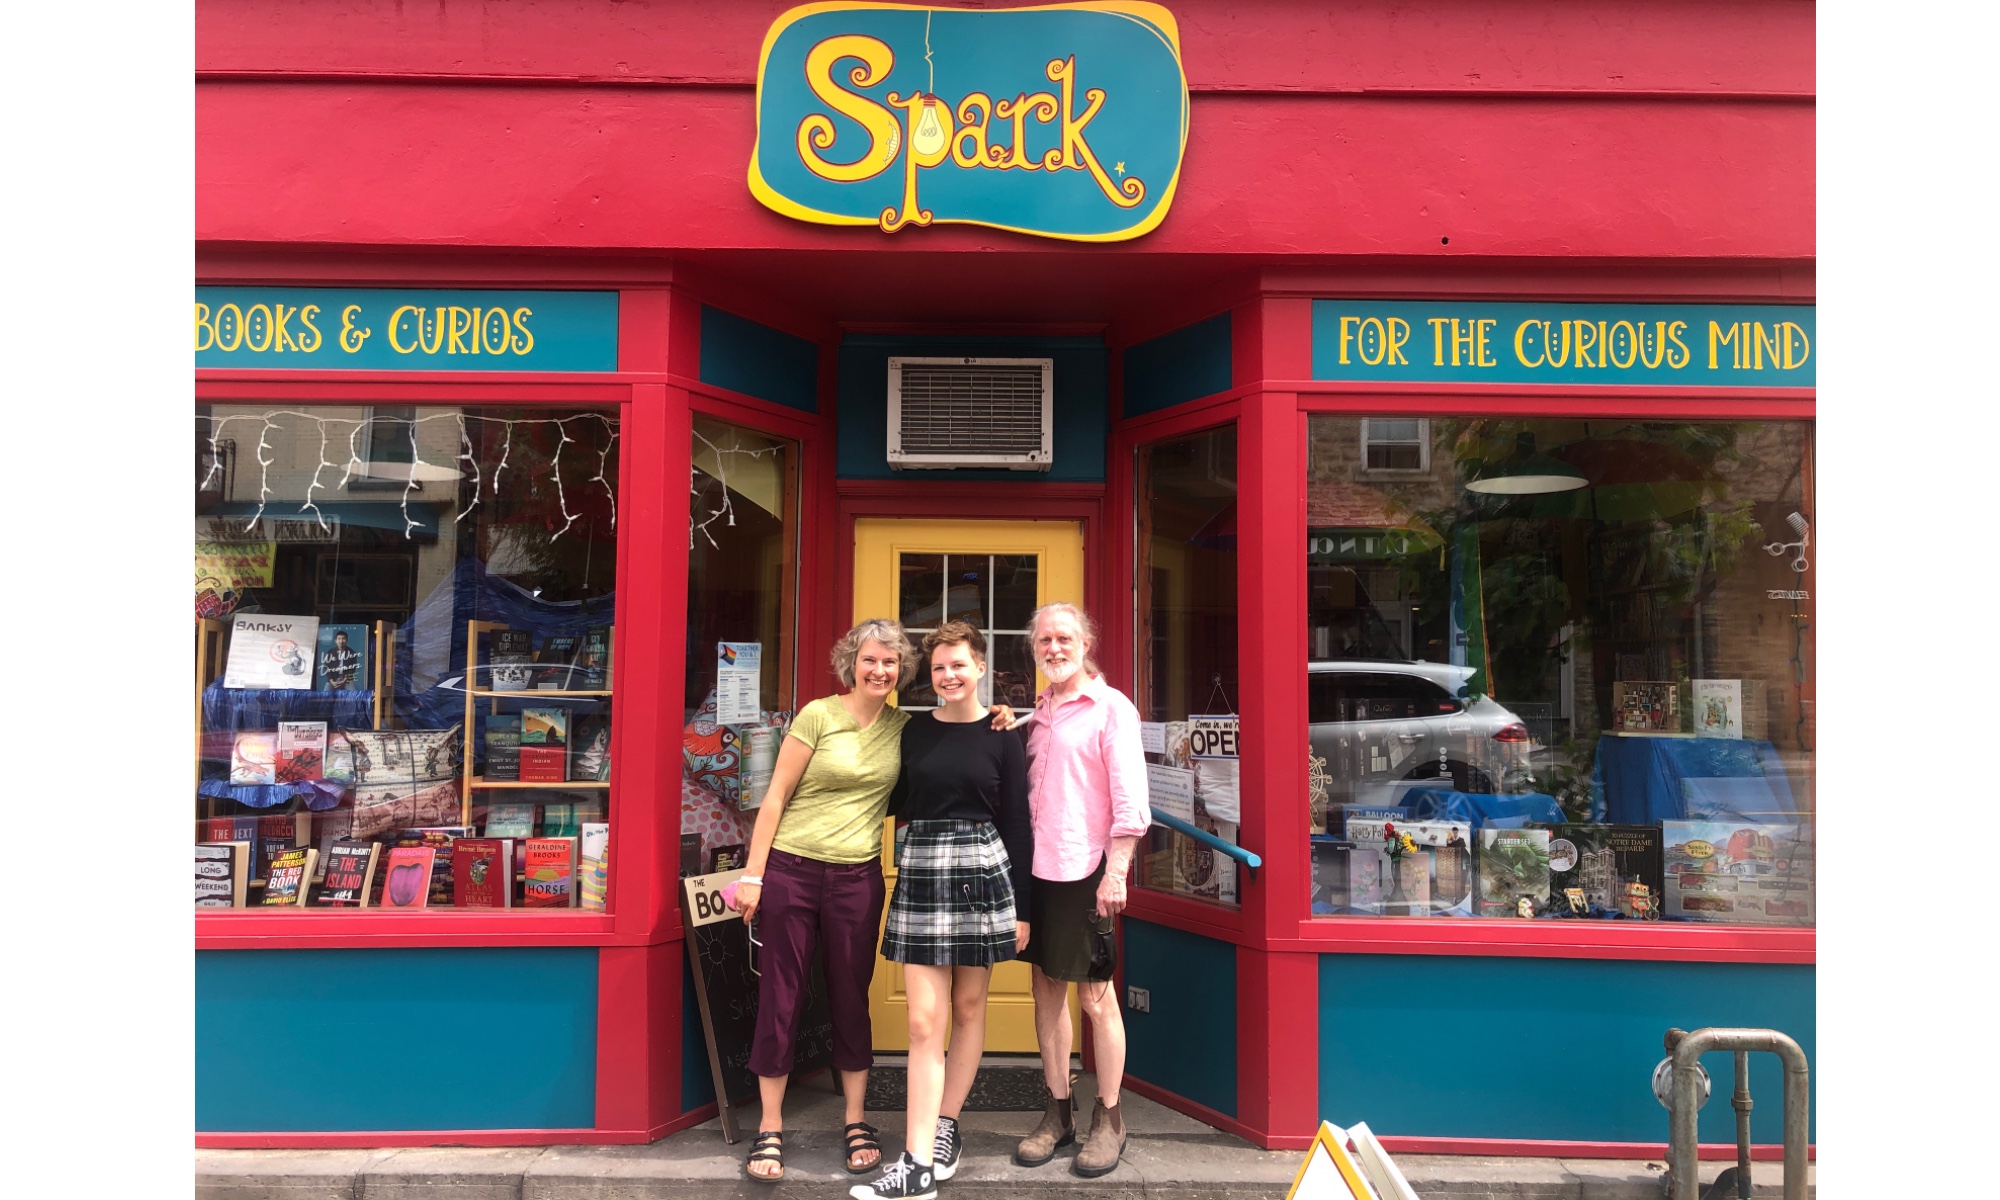 Three people stand in front of a red storefront. The sign says "Spark" in yellow letters on a turquoise background.